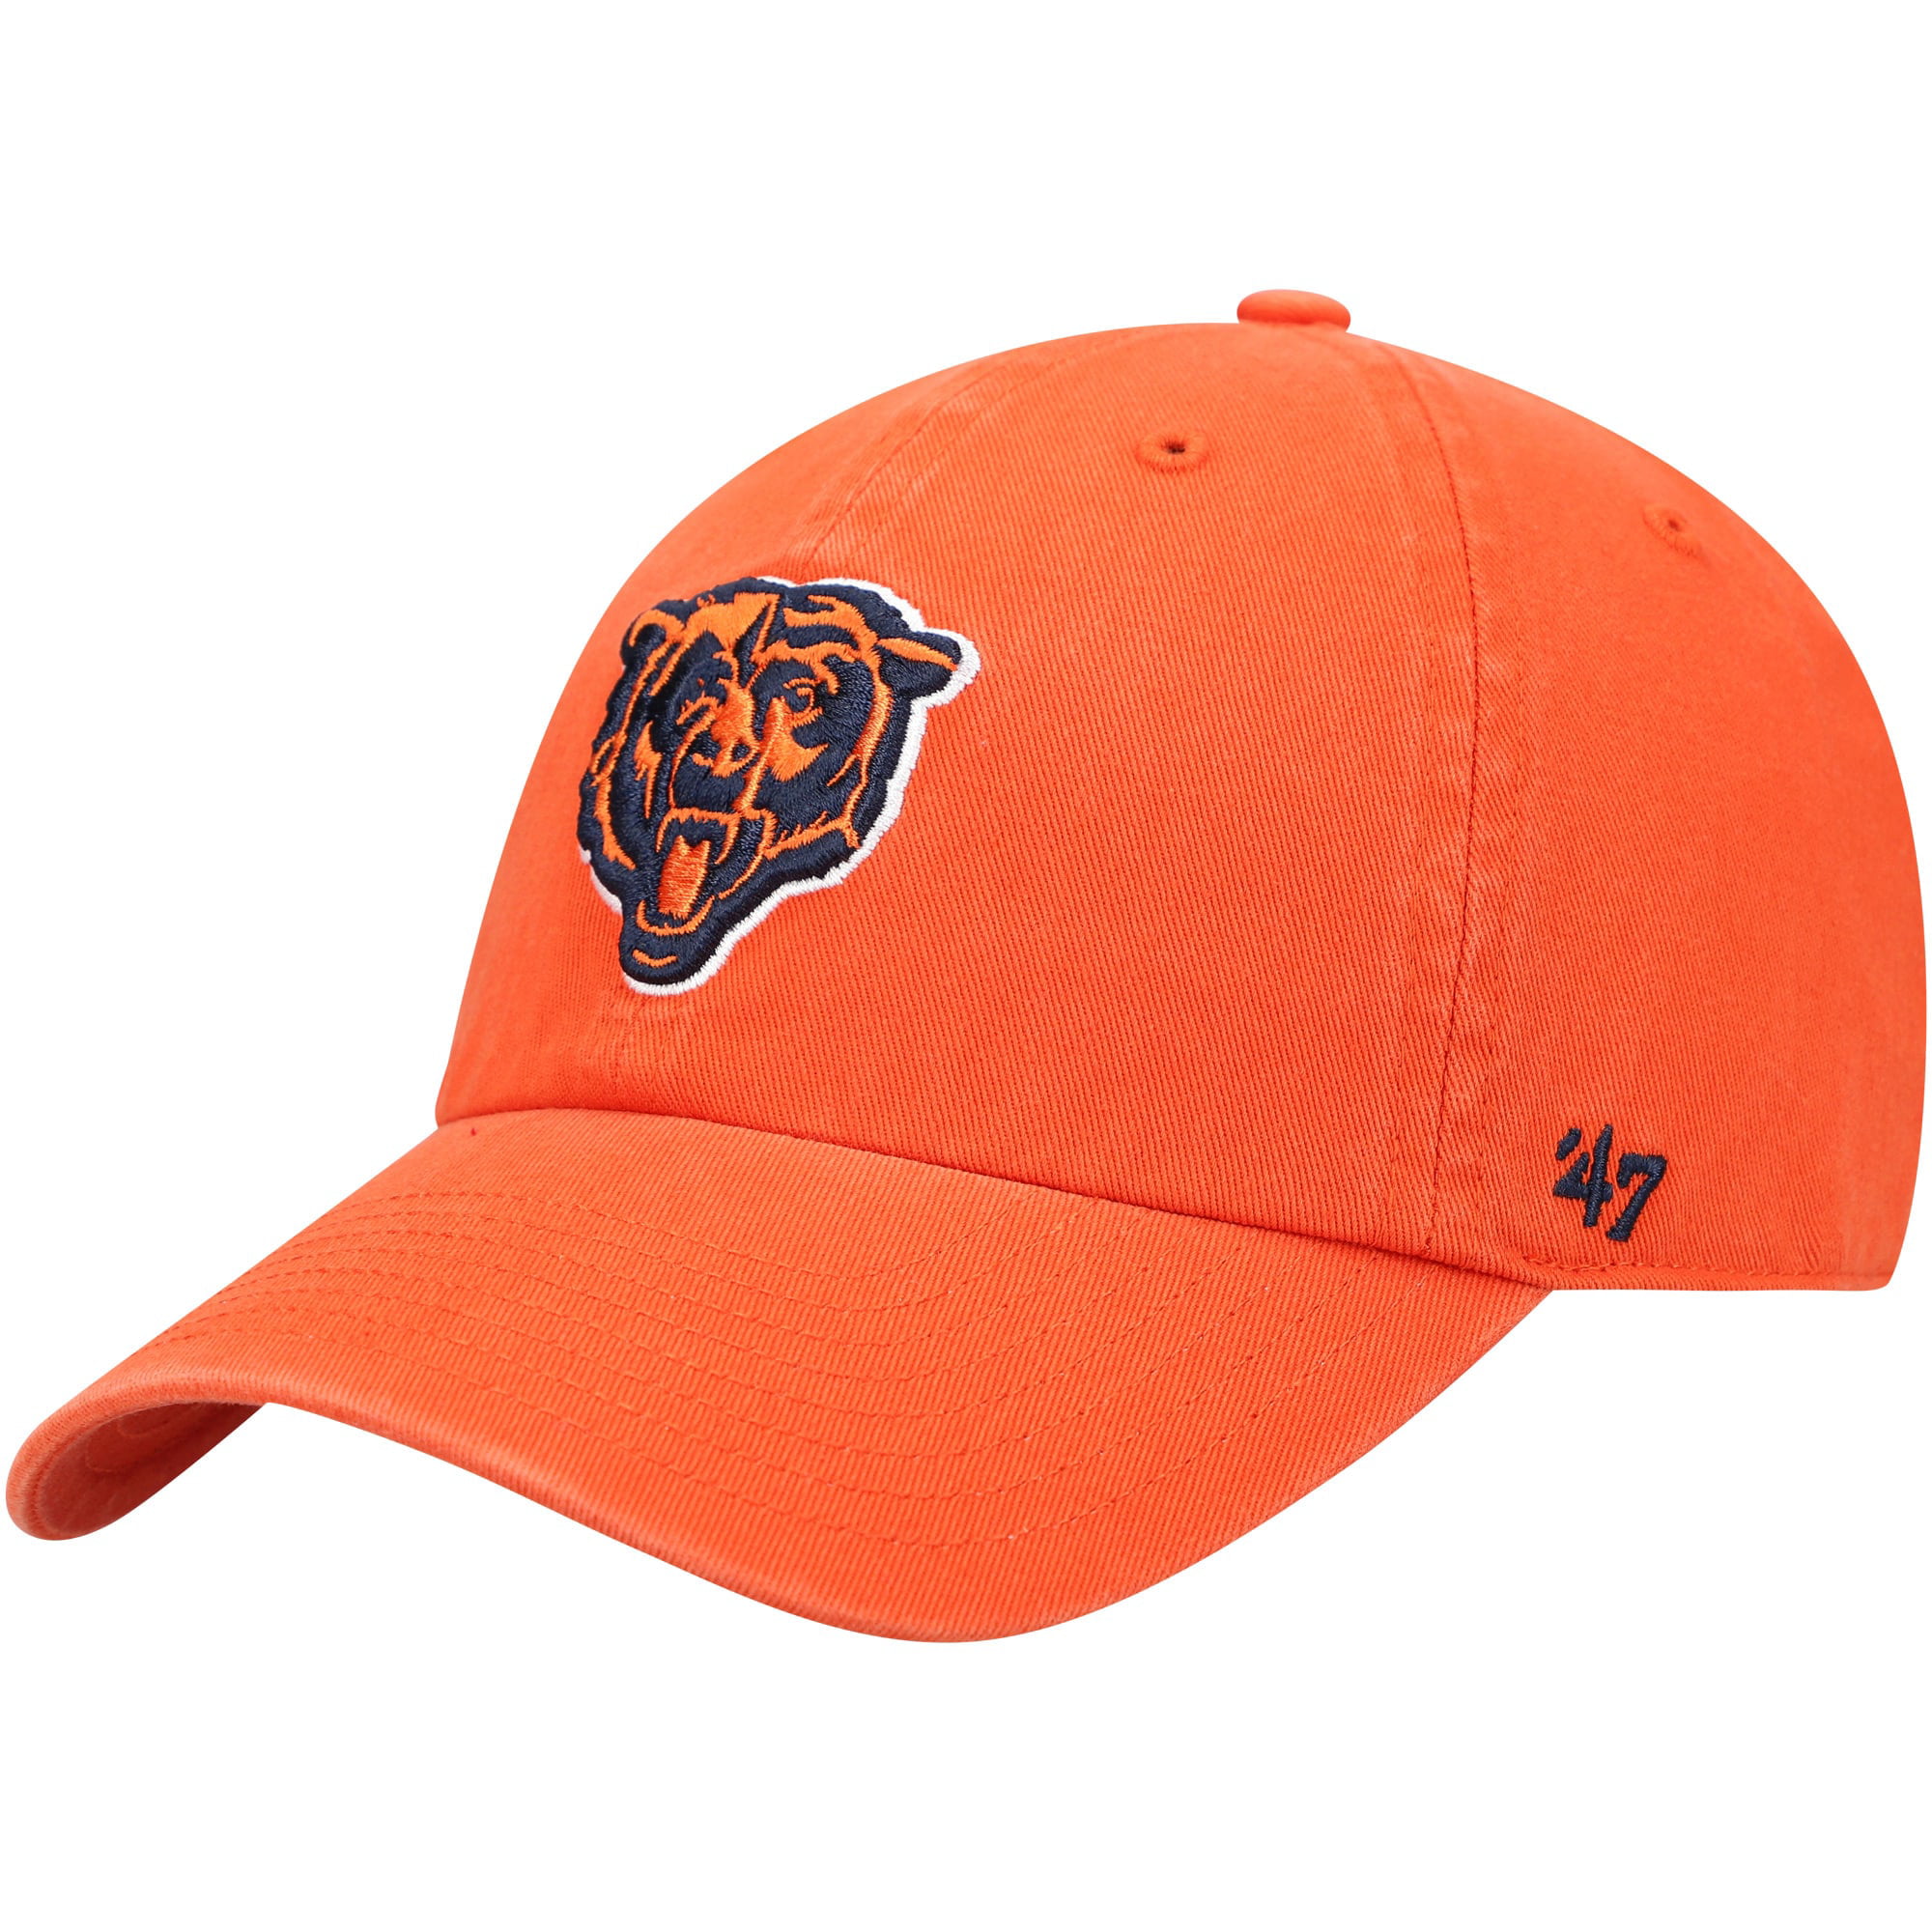 Chicago Bears '47 Secondary Clean Up Adjustable Hat - Orange - OSFA ...